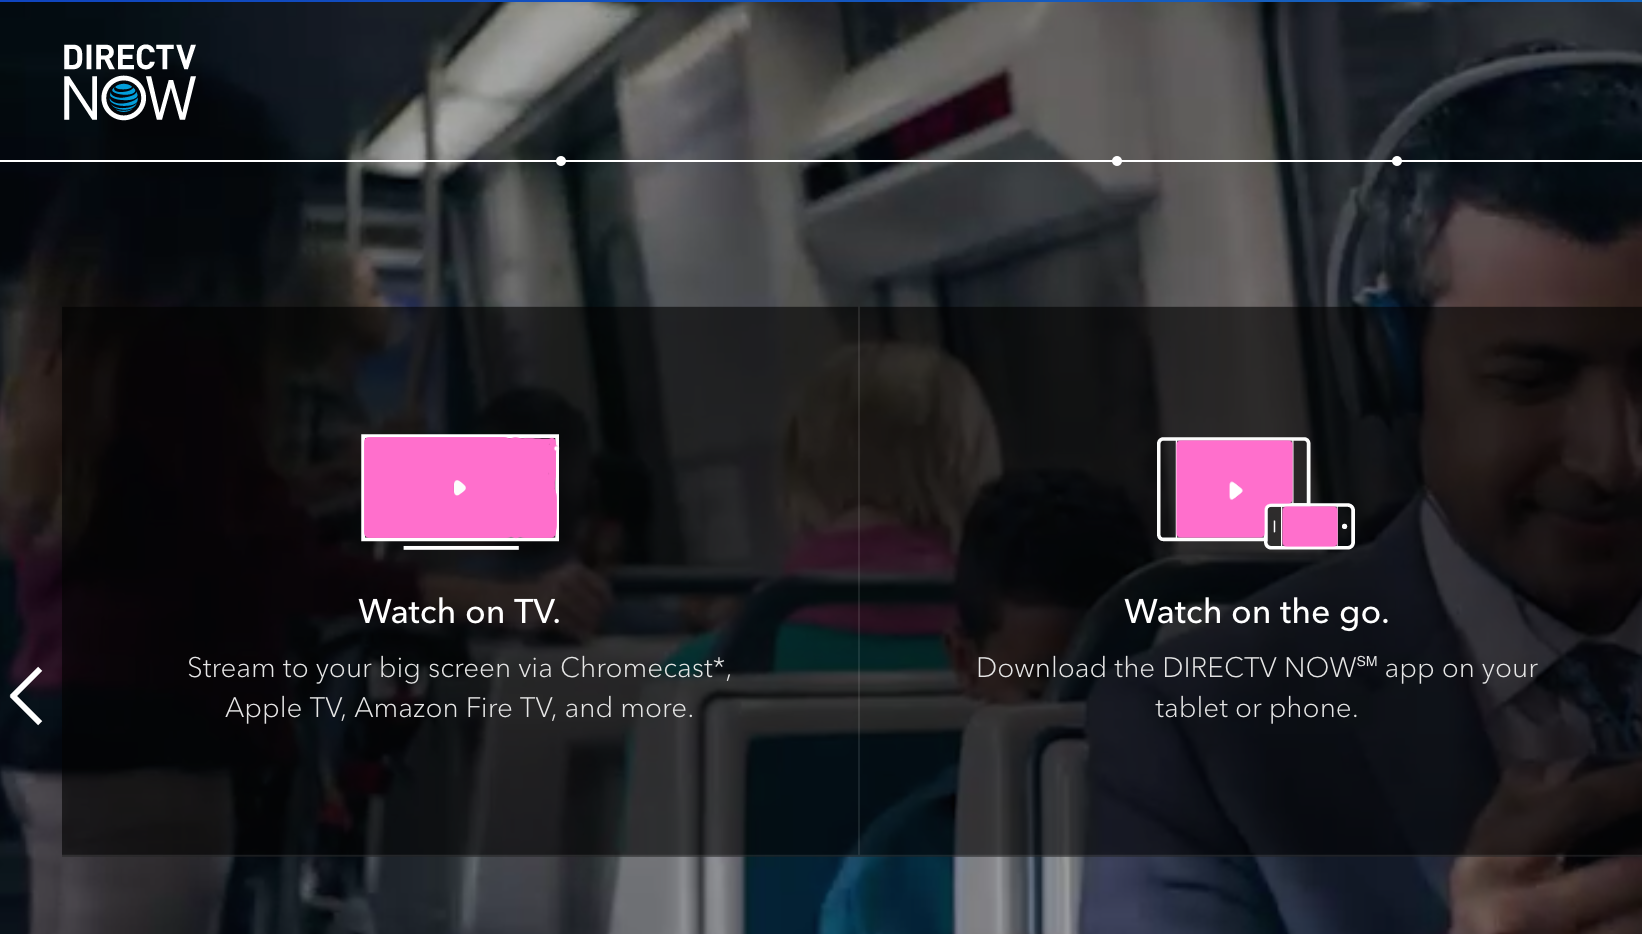 T-Mobile Tries To Get Under AT&T’s Skin By Offering 12 Months Of DirecTV Now For Free